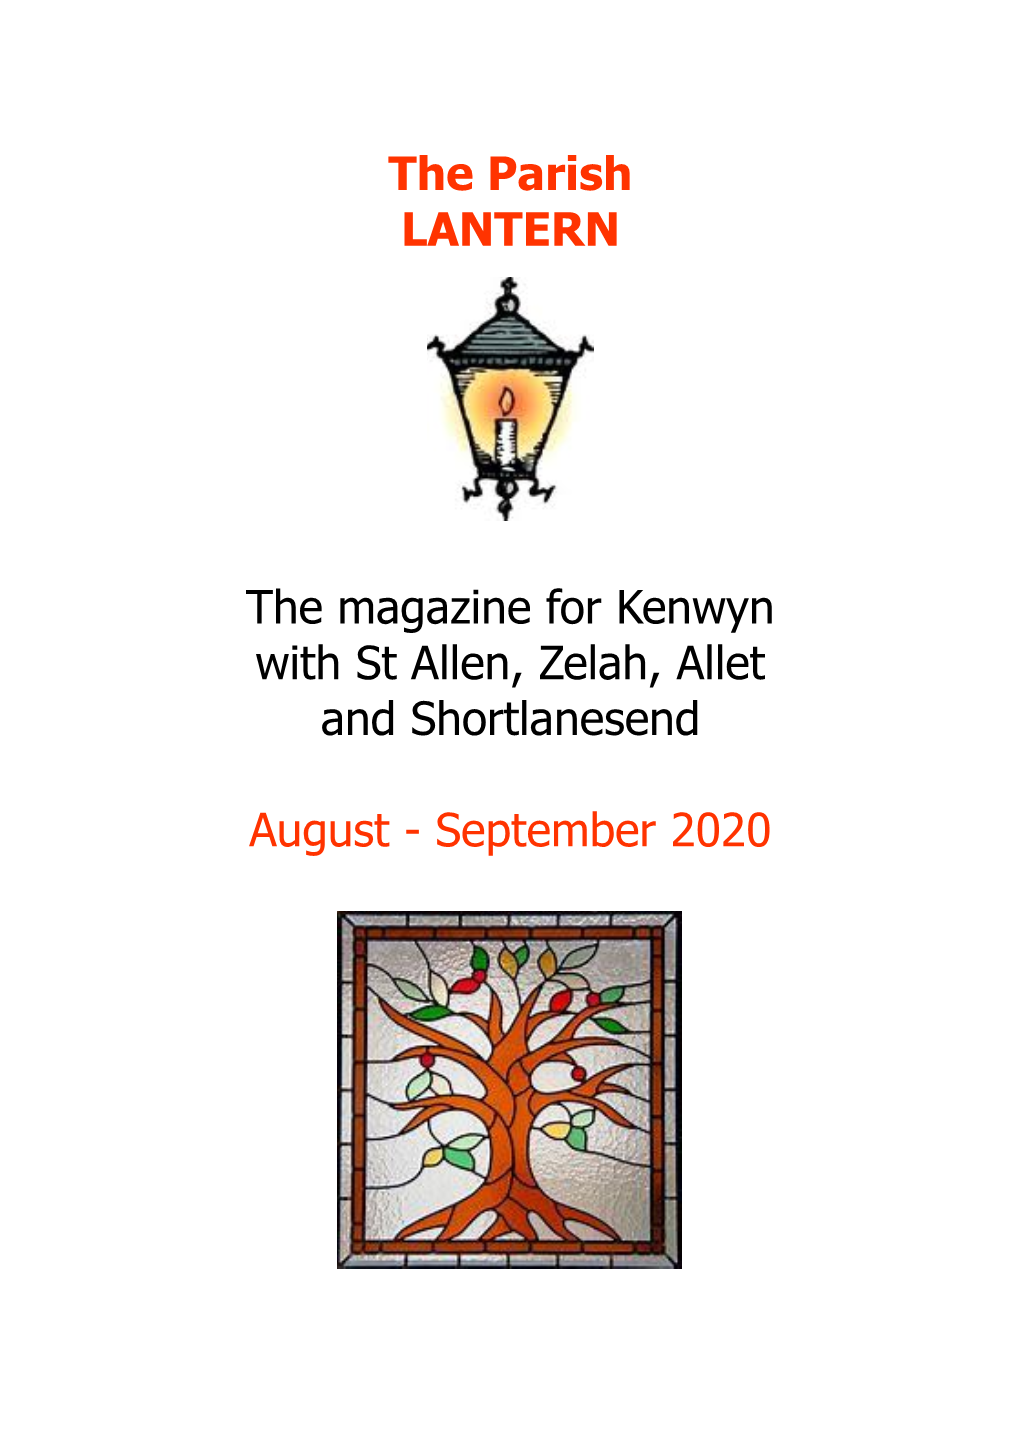 The Parish LANTERN the Magazine for Kenwyn with St Allen, Zelah, Allet and Shortlanesend August